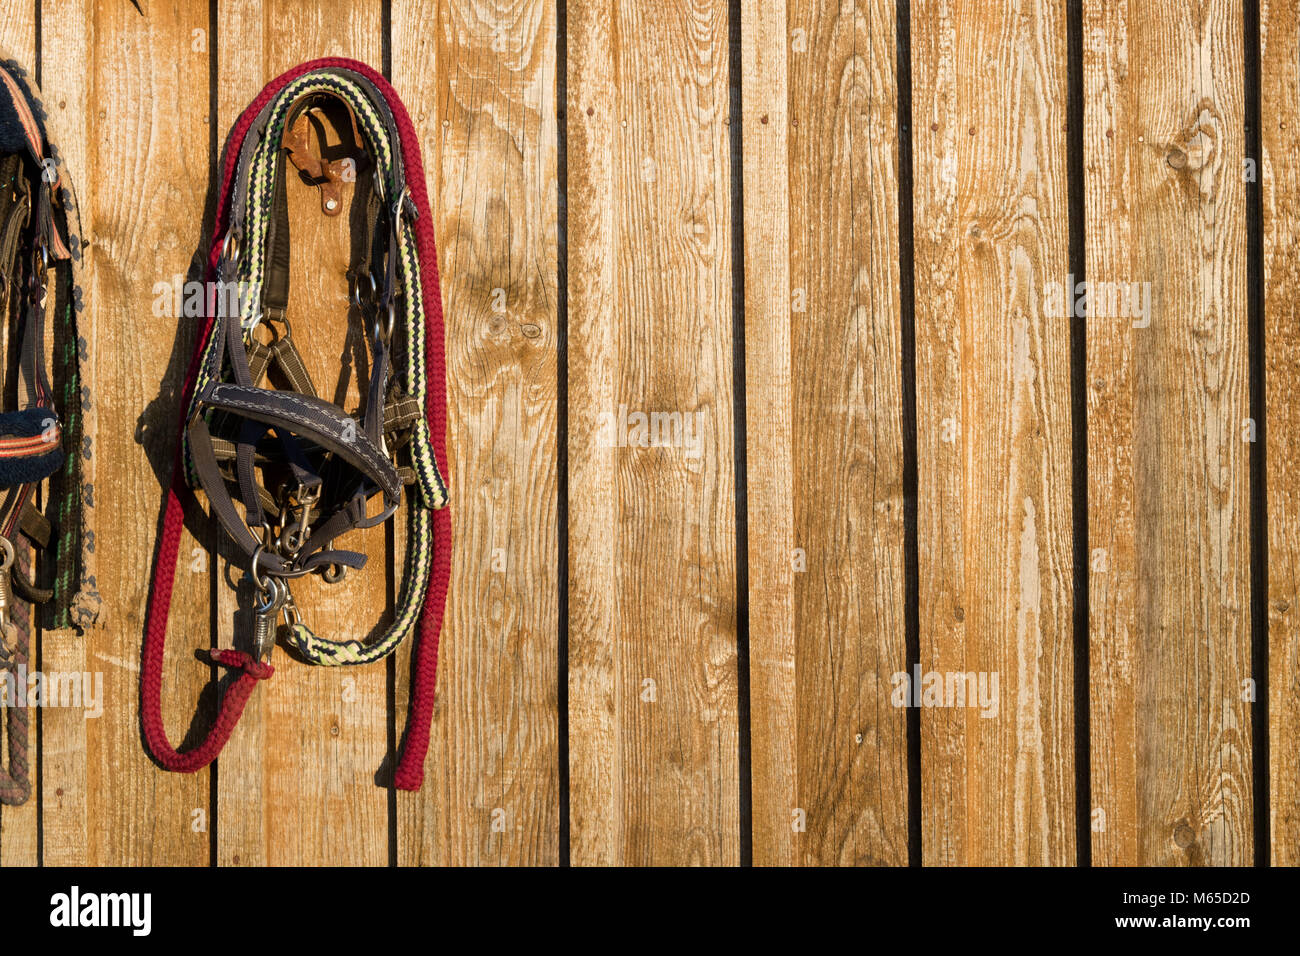 Bridle horse hanging on a wooden wall. Stock Photo